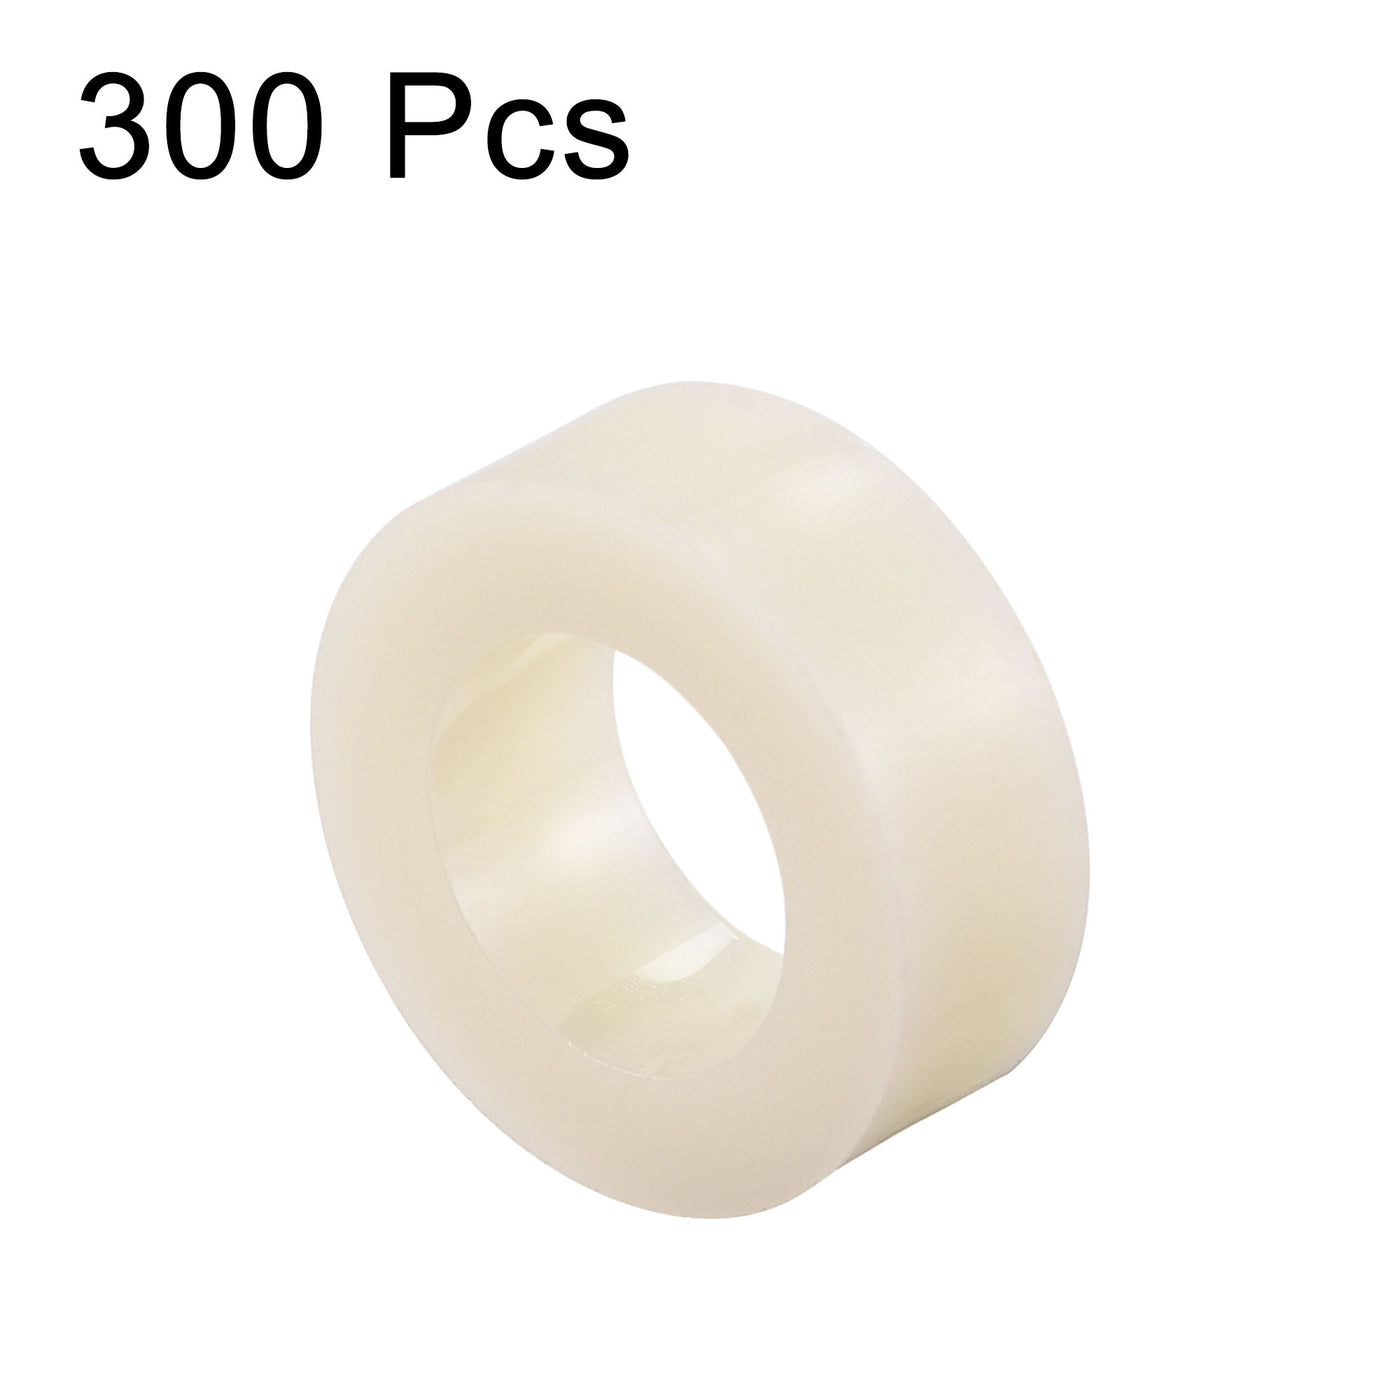 Uxcell Uxcell ABS Round Spacer Washer ID 8.2mm OD 14mm L 8mm for M8 Screws, Beige, 300Pcs